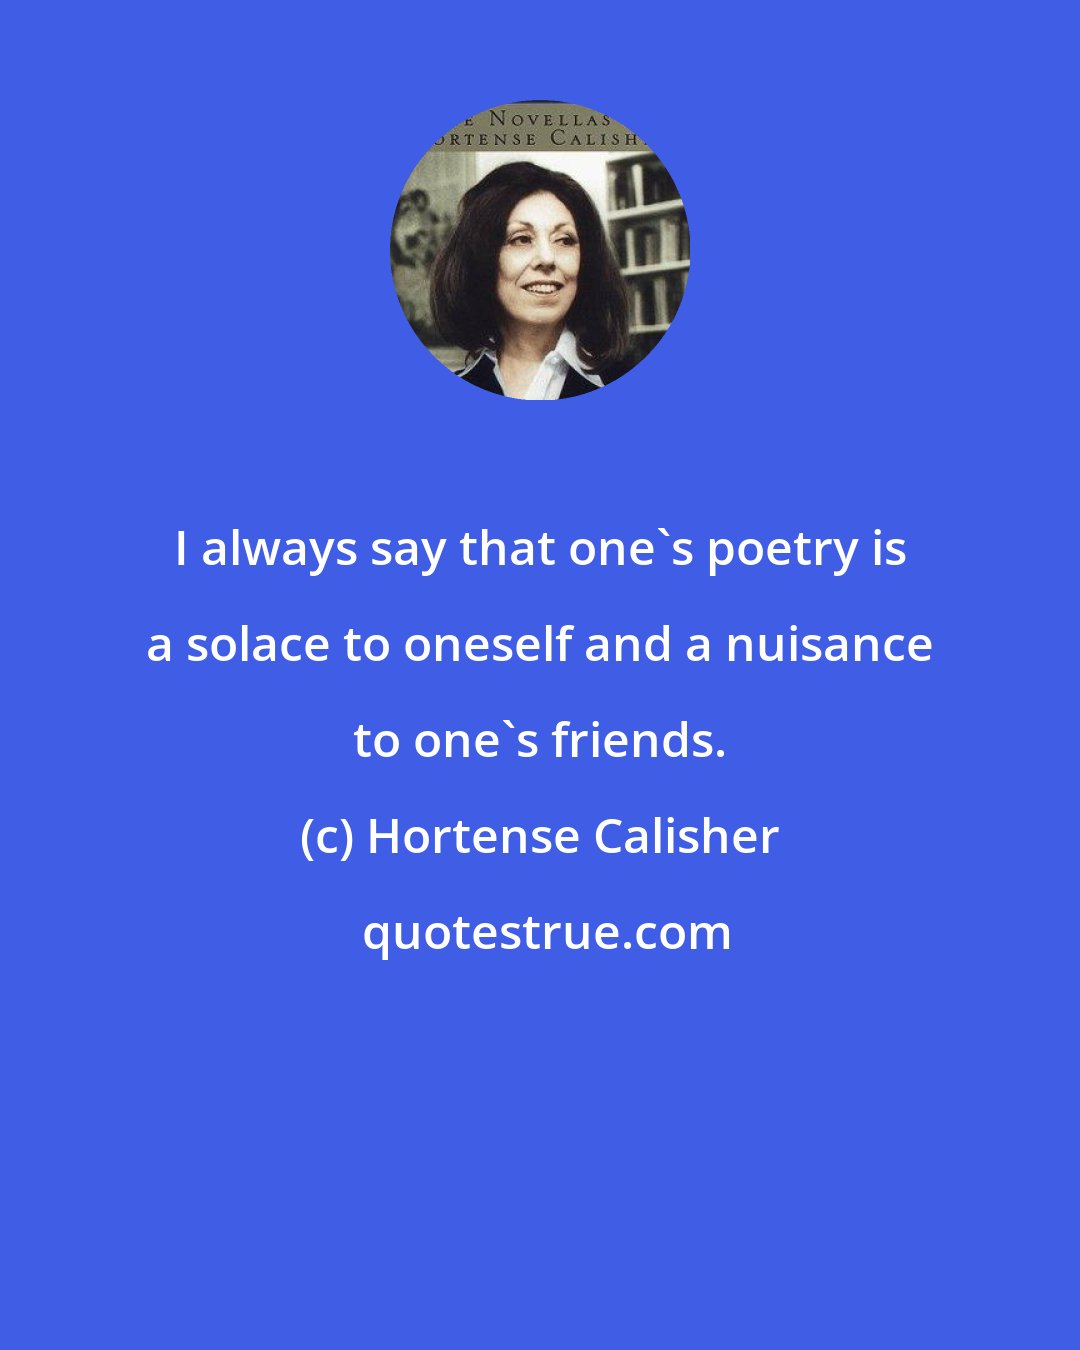 Hortense Calisher: I always say that one's poetry is a solace to oneself and a nuisance to one's friends.